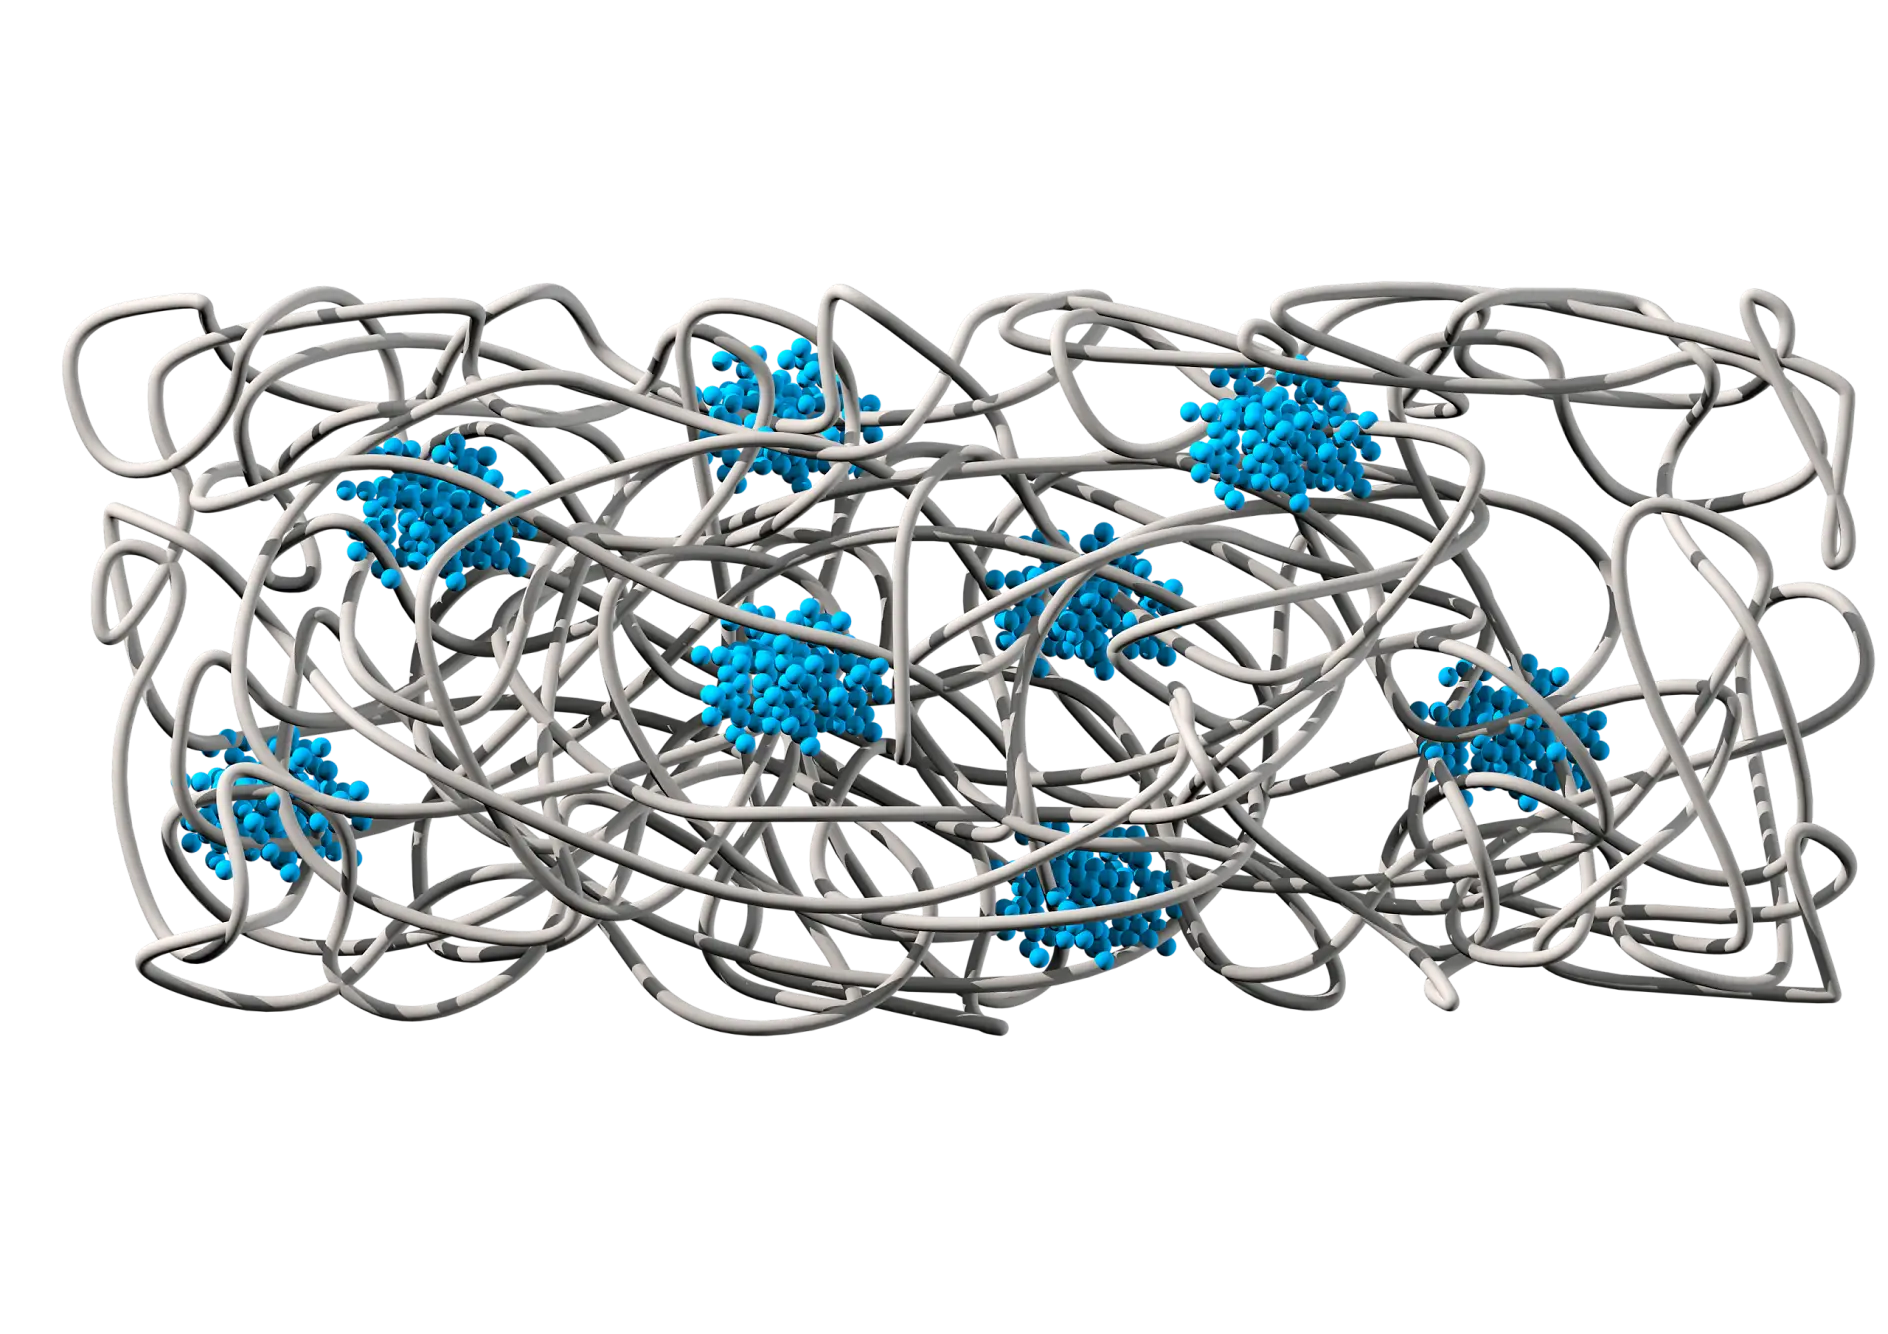 The chemical structure shows a rubber matrix (grey) that provides adhesion and elasticity. And Polystyrene Domains (blue) that provide cohesion and tear resistance.